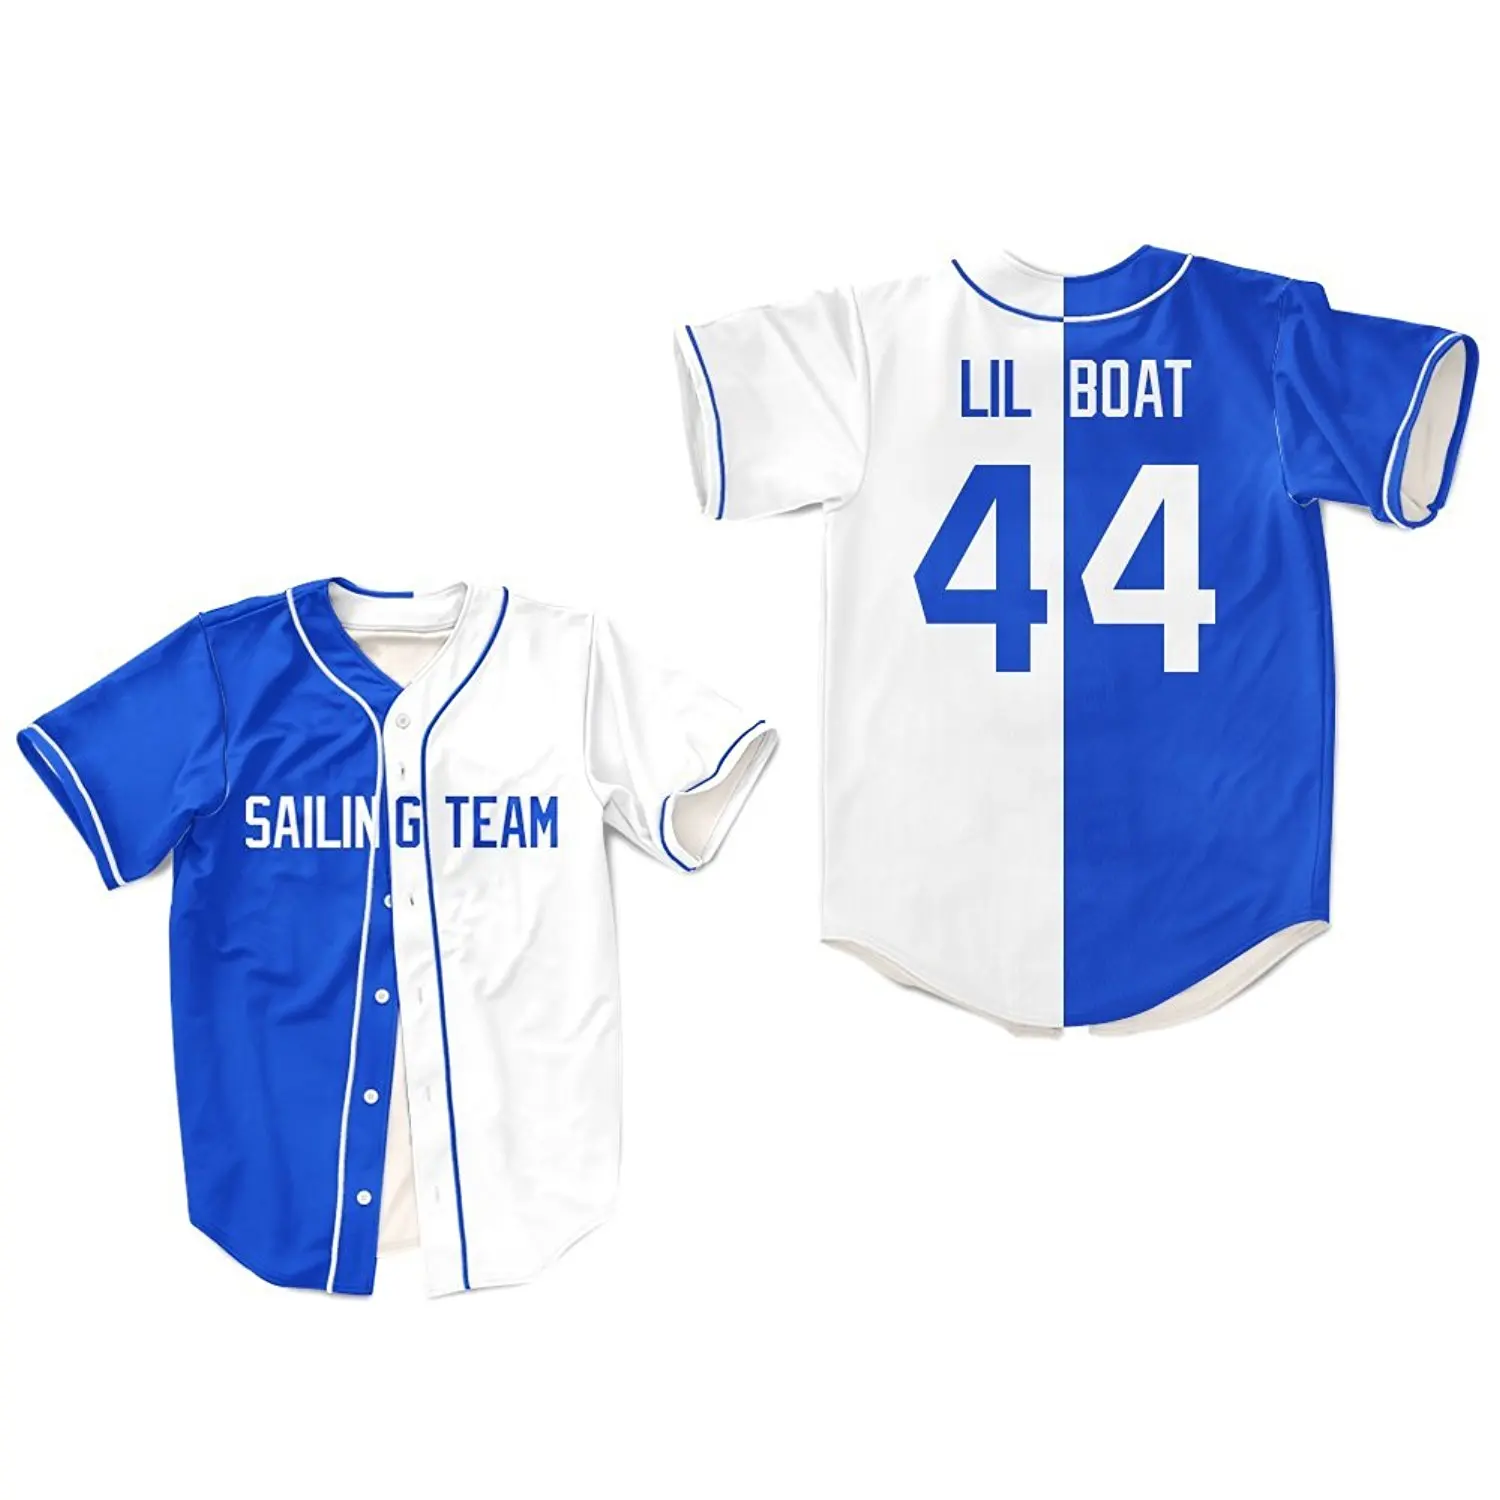 white and royal blue jersey